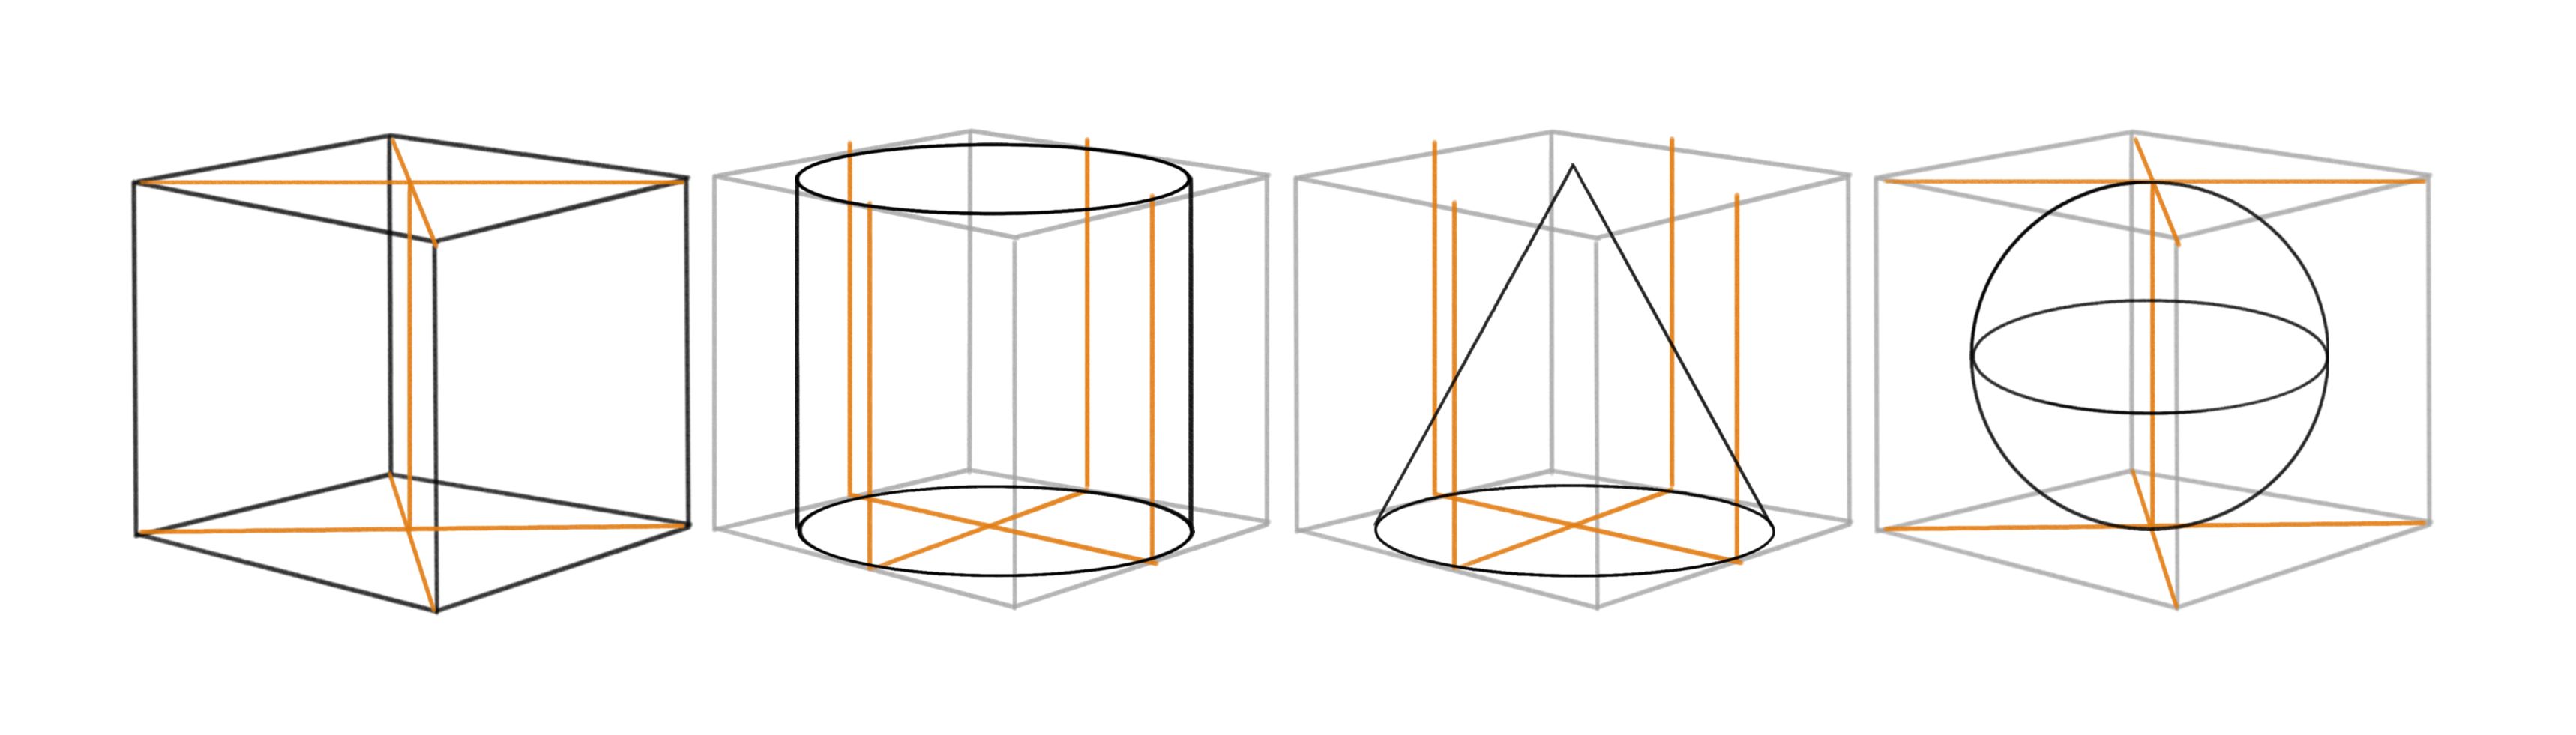 four sketches of a cilinder, cone, sphere in a cube and a plain cube